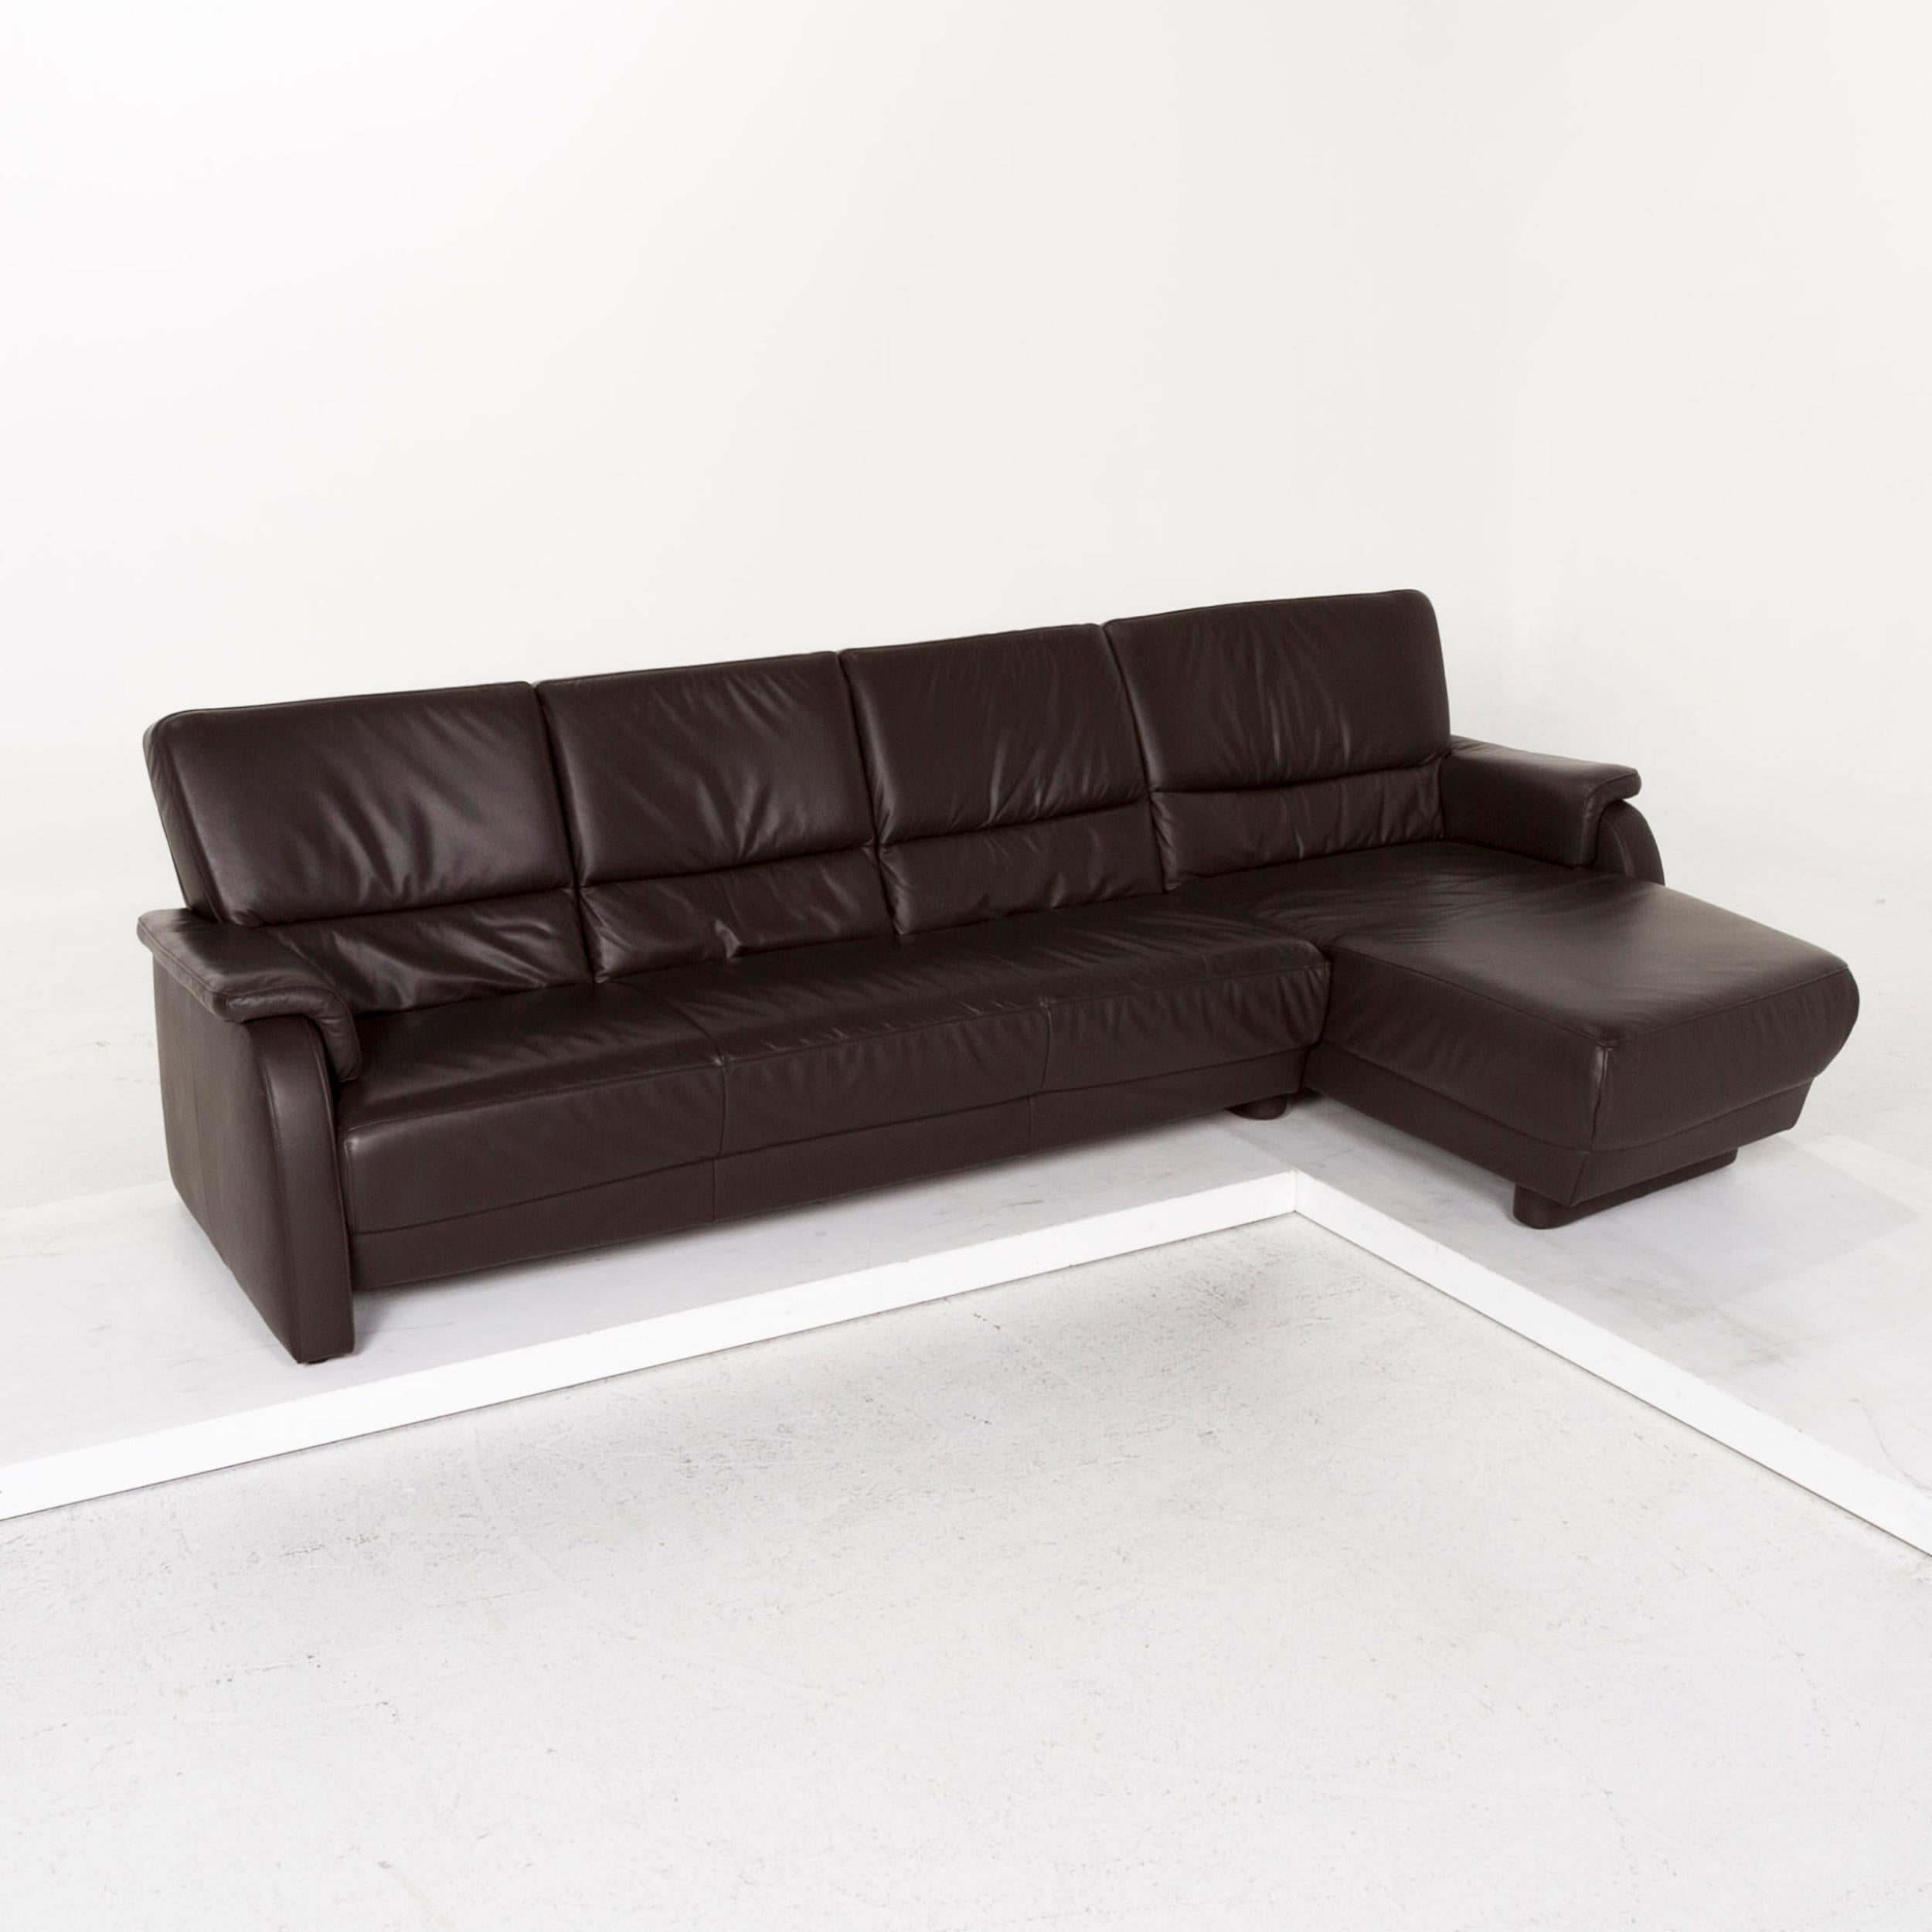 Contemporary Himolla Leather Corner Sofa Brown Dark Brown Couch For Sale